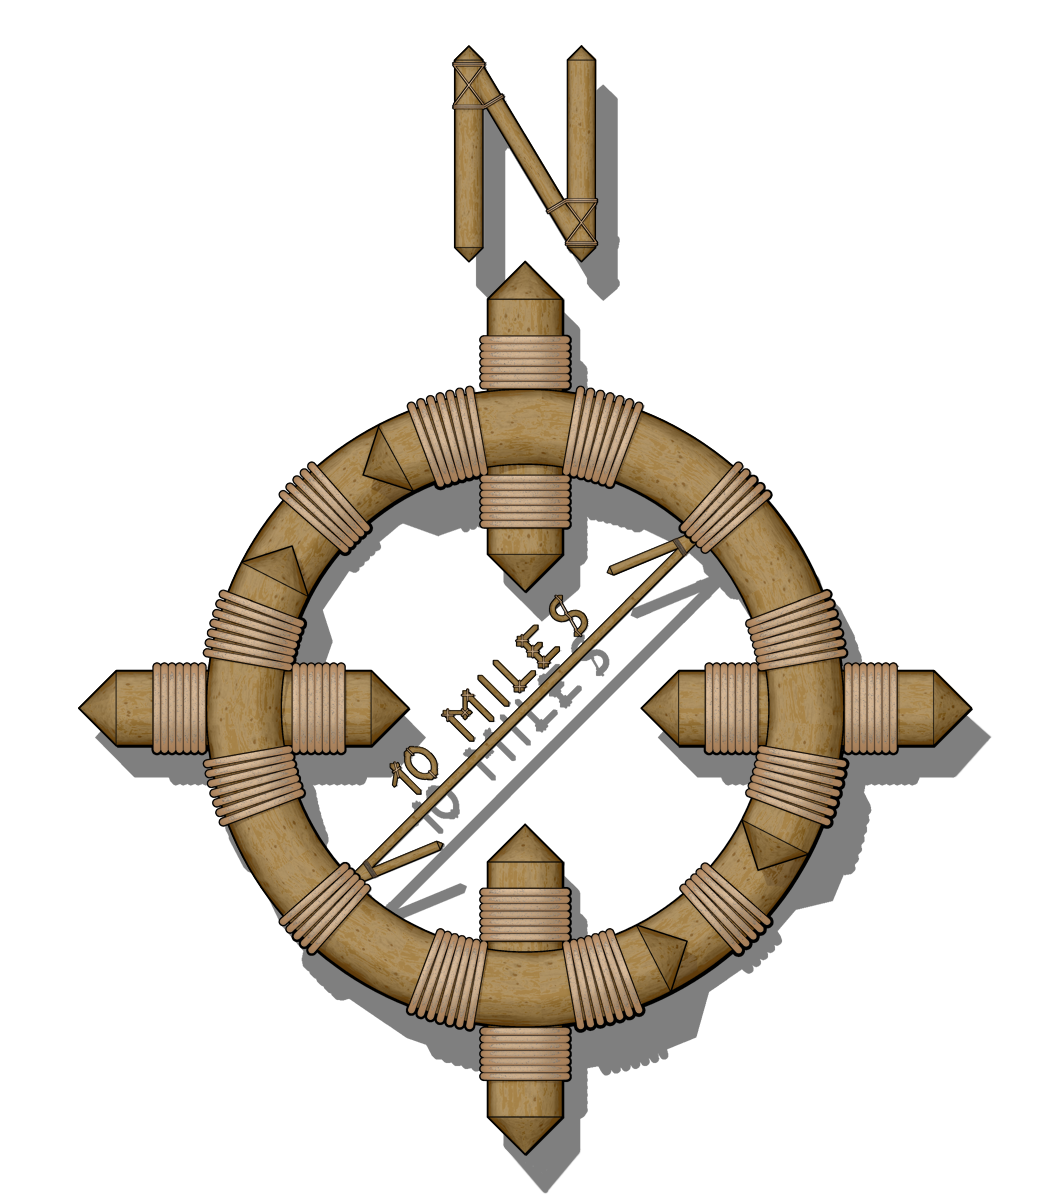 January/February 2012 Lite Challenge Entry: Frontier Compass Rose